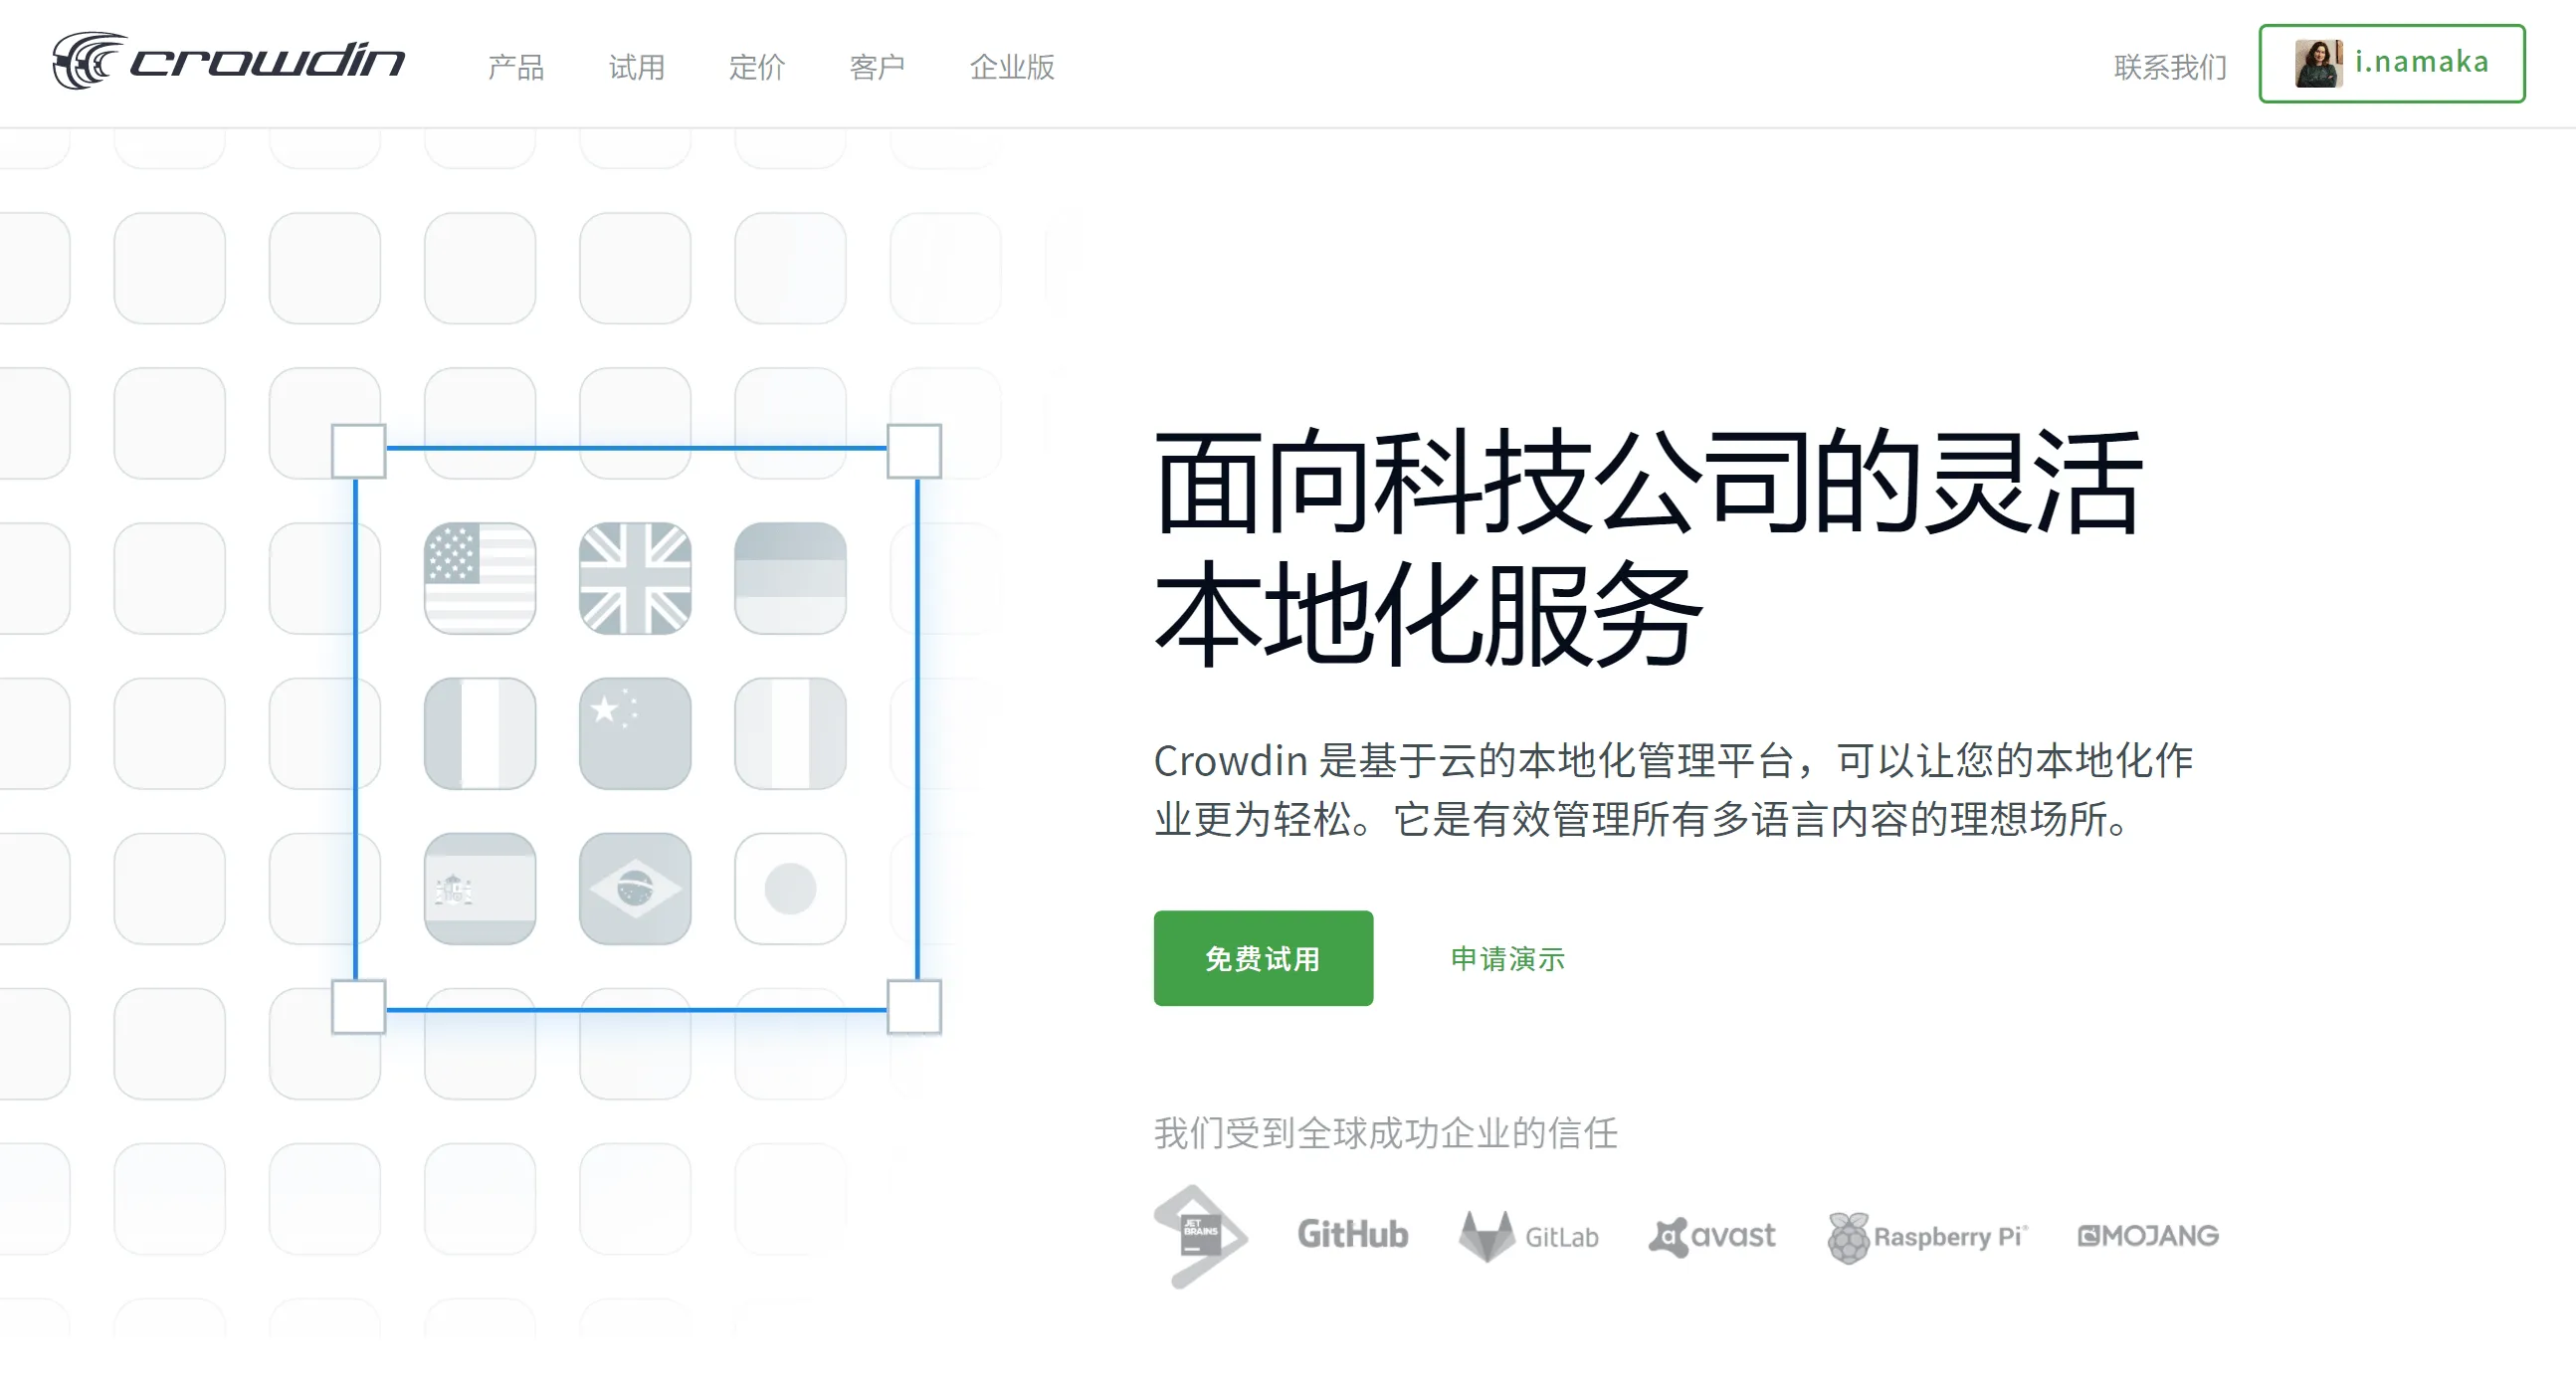 Chinese version of Crowdin website